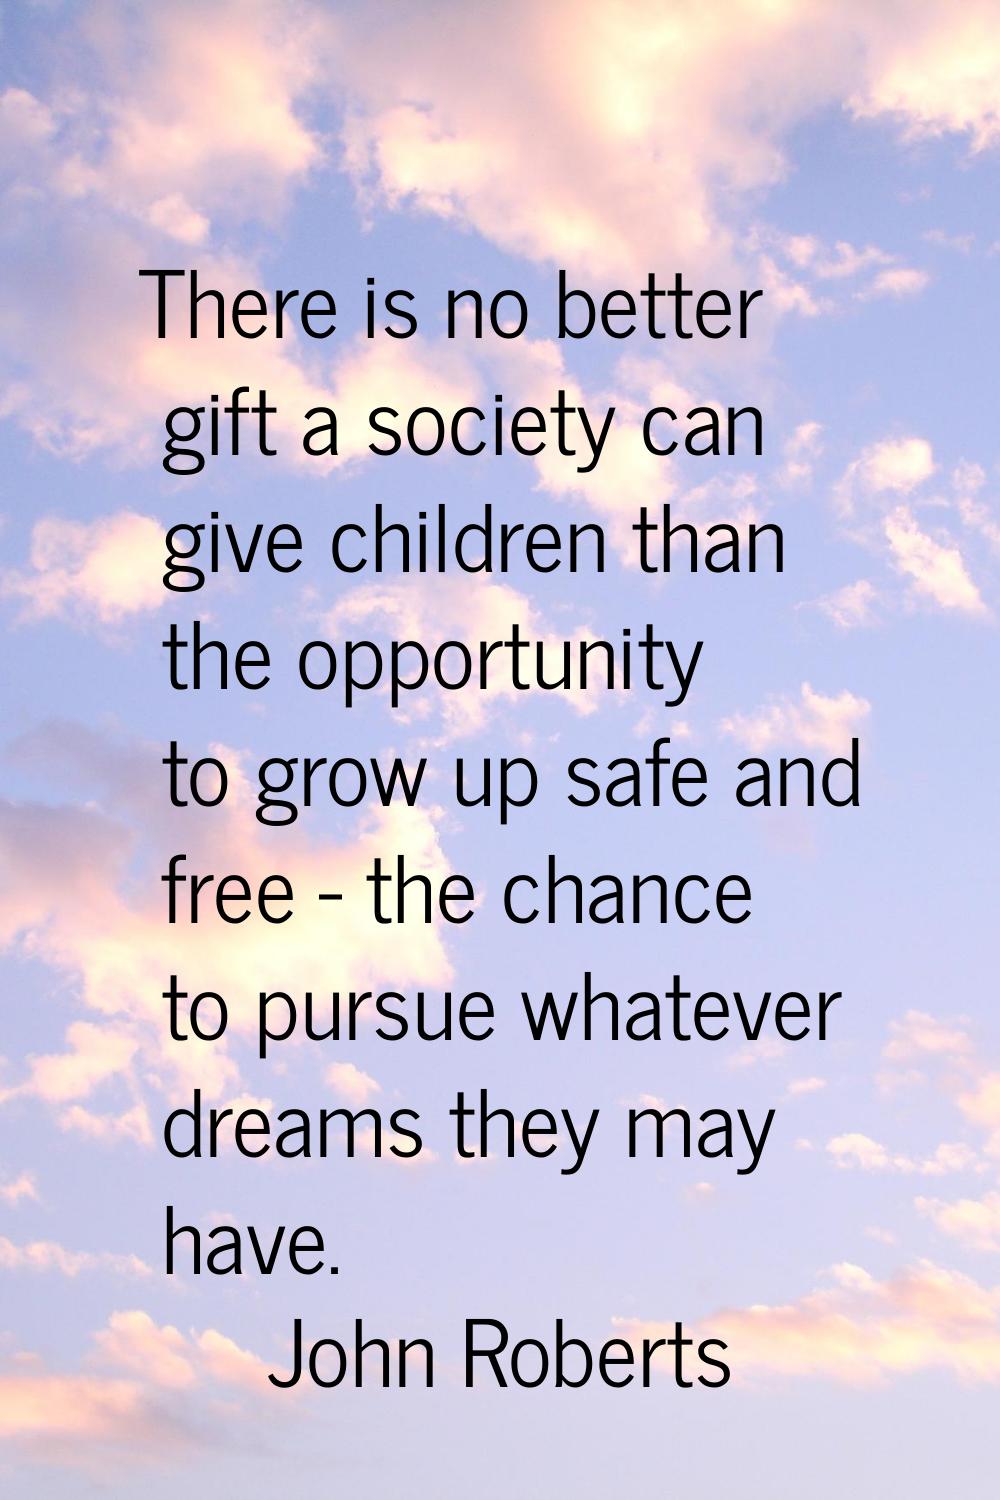 There is no better gift a society can give children than the opportunity to grow up safe and free -